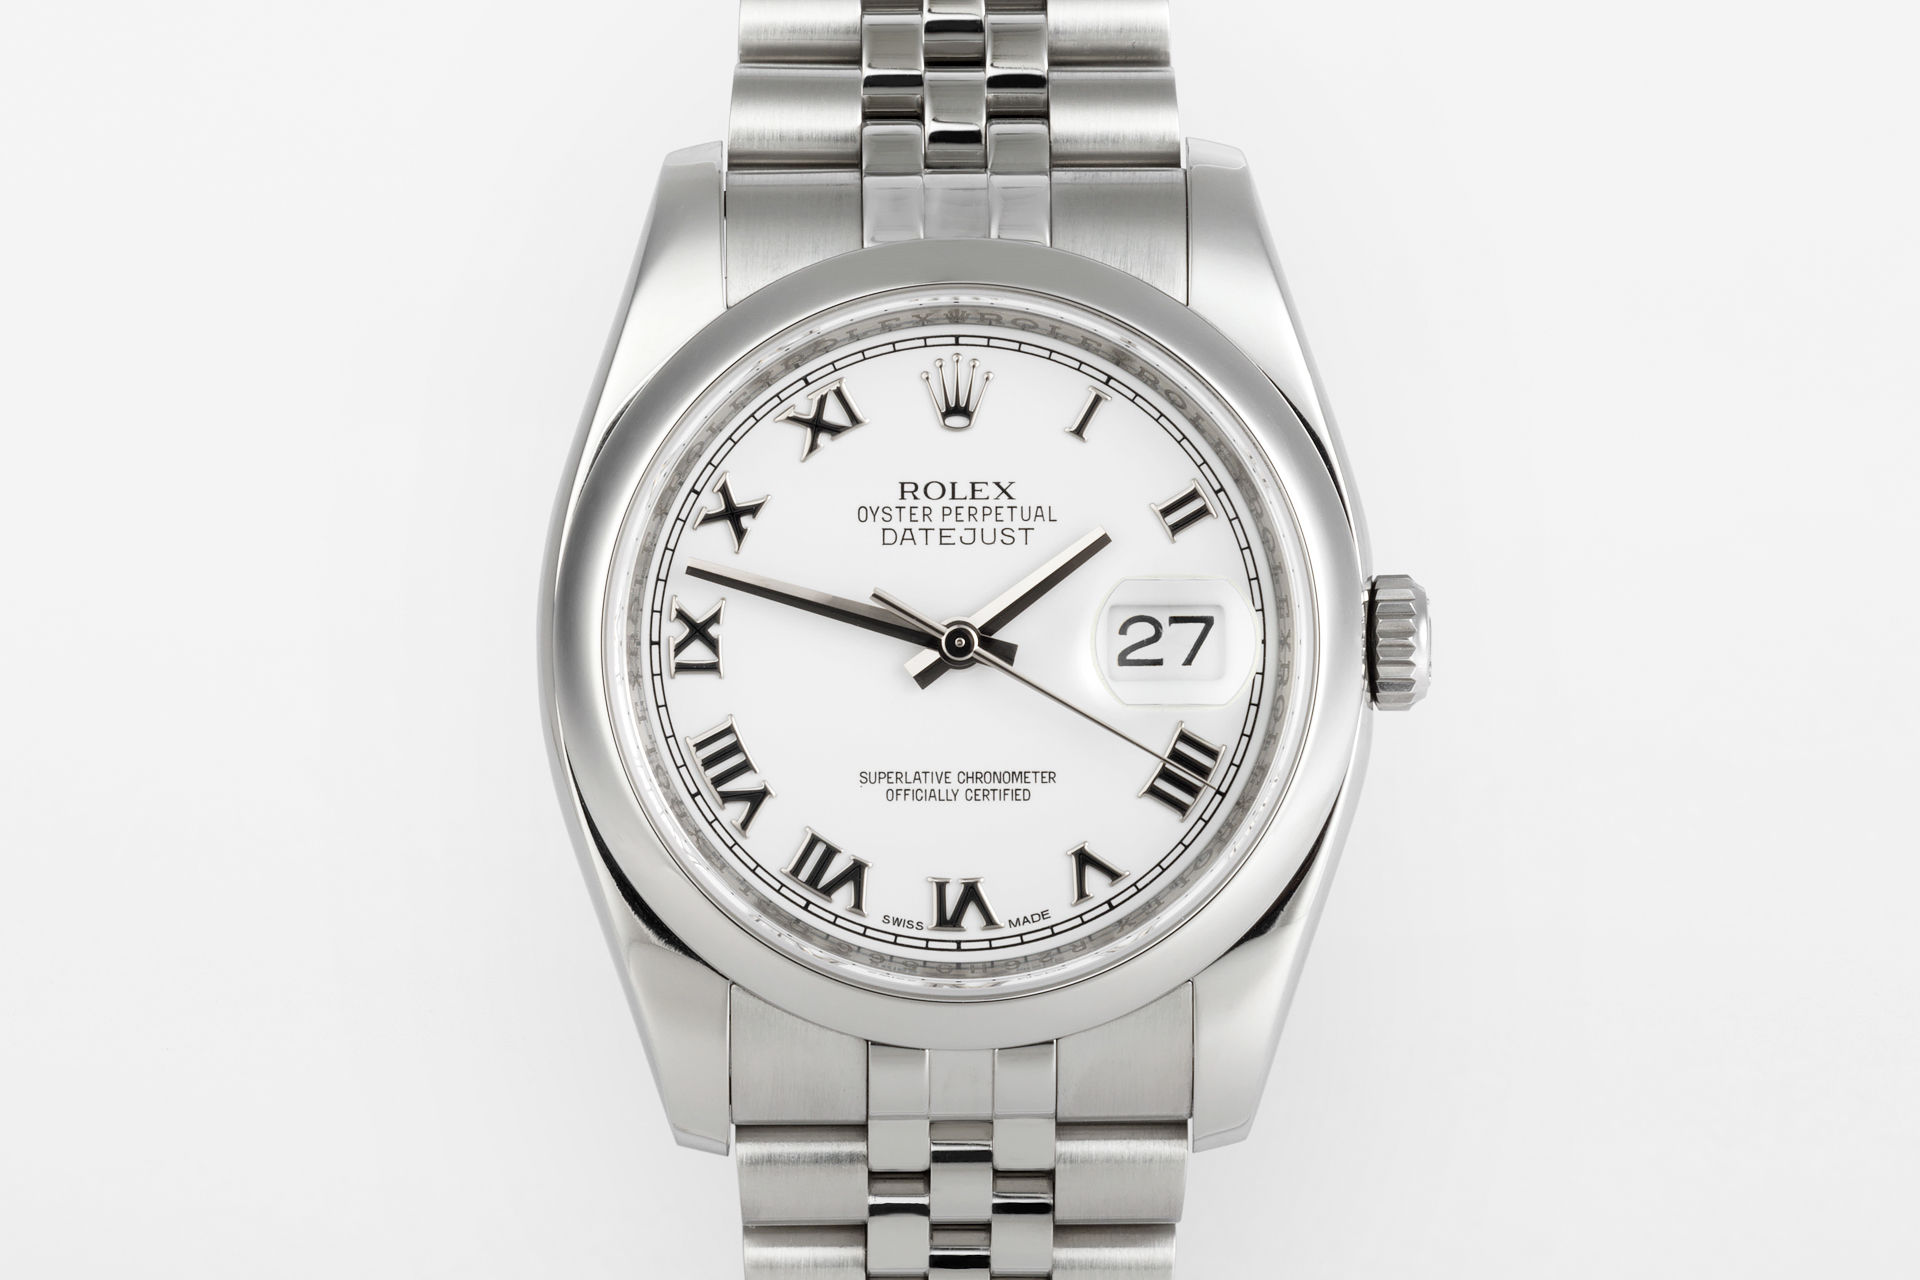 ref 116200 | 36mm Box & Papers | Rolex Datejust